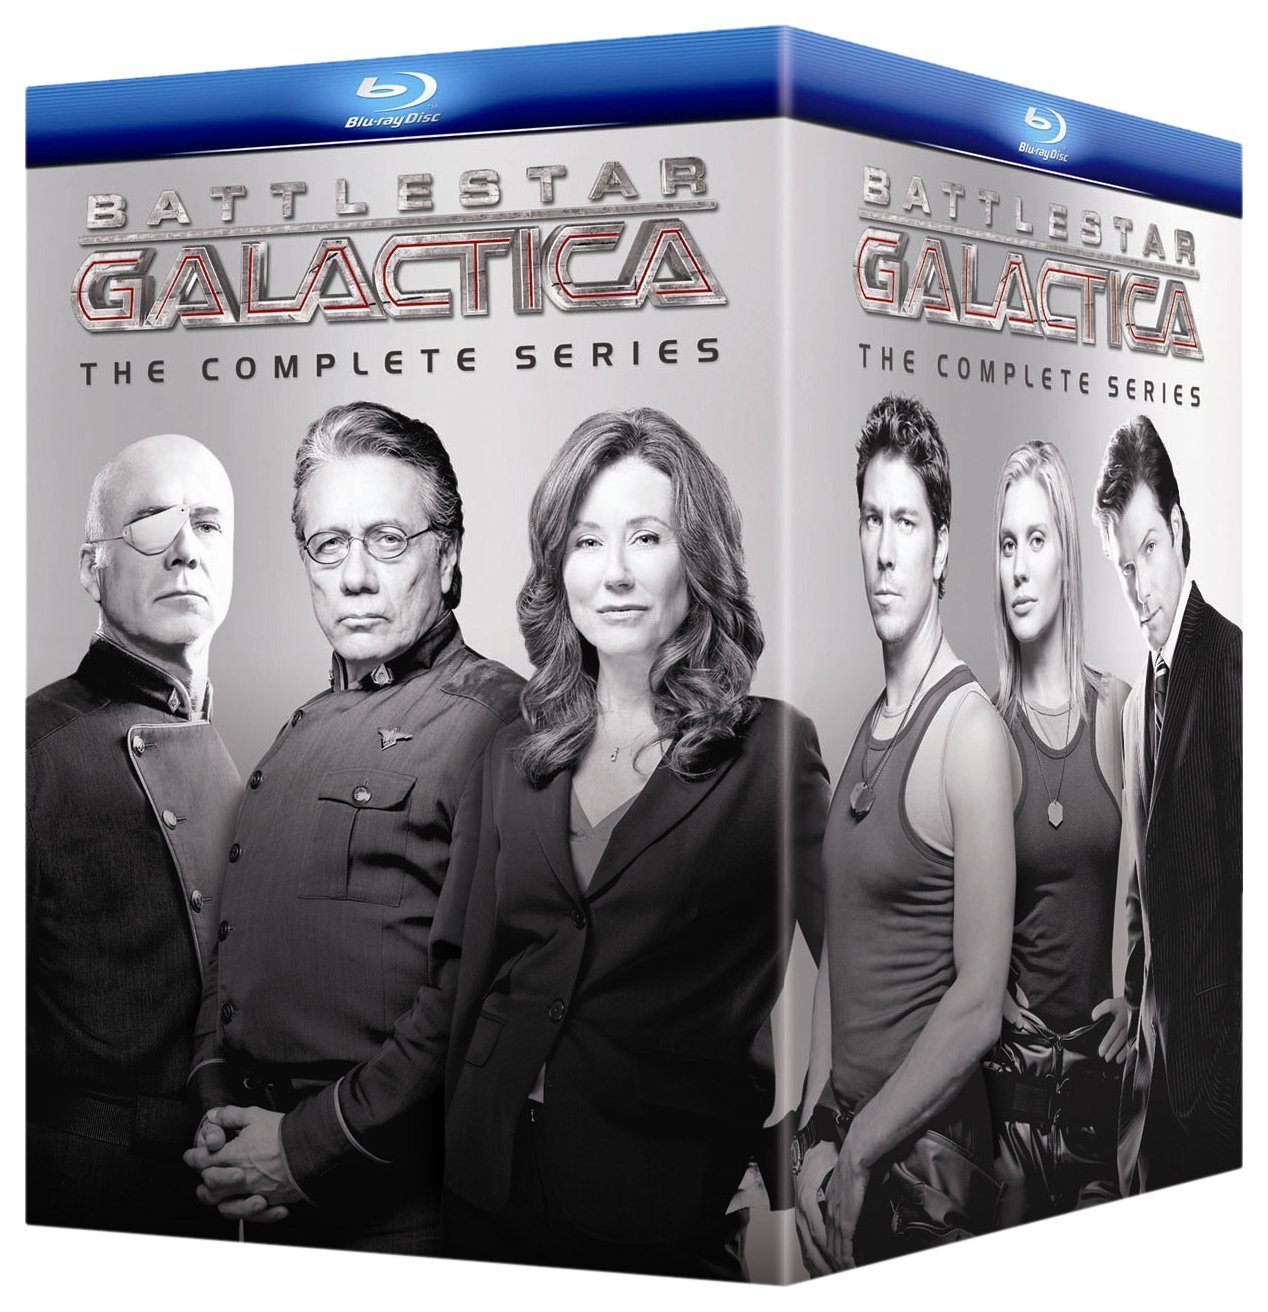 Battlestar Galactica: The Complete Series on Blu-ray – Just $79.99!